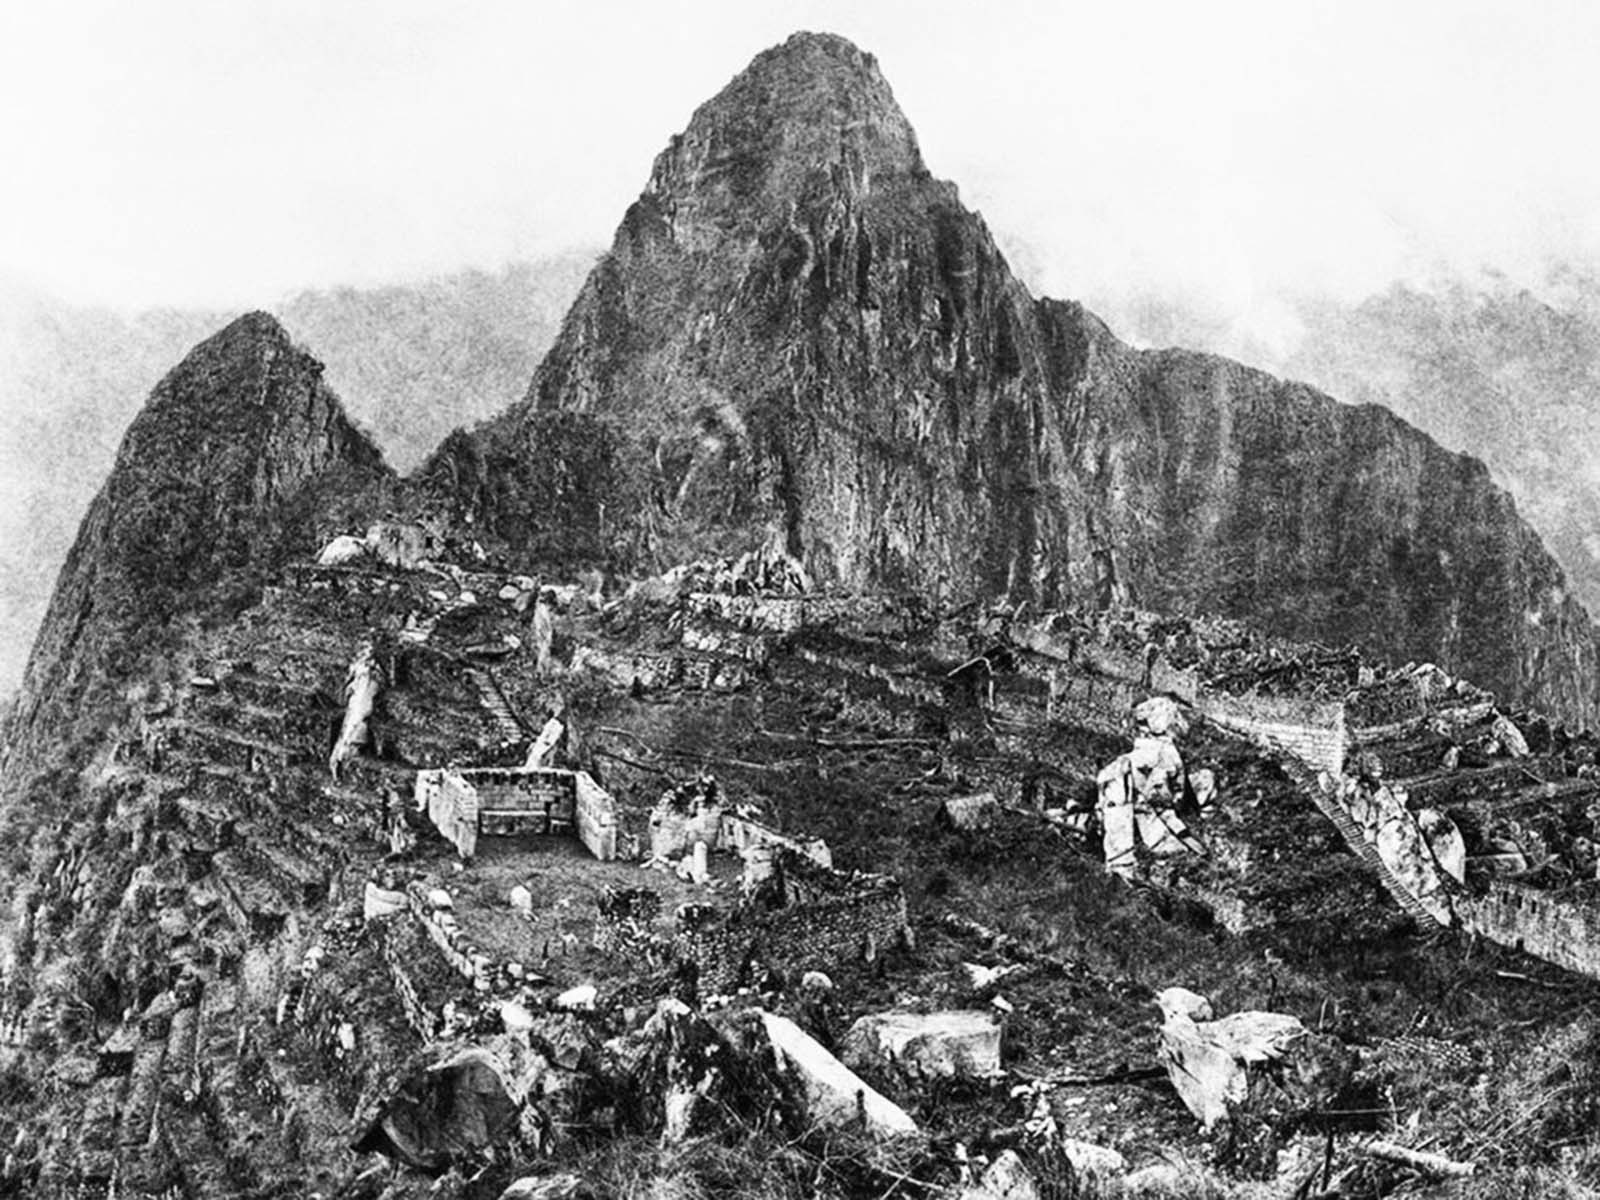 The ruins of Machu Picchu are shrouded in jungle growth in this 1911 photograph captured during the initial visit of Yale archaeologist Hiram Bingham to the site.